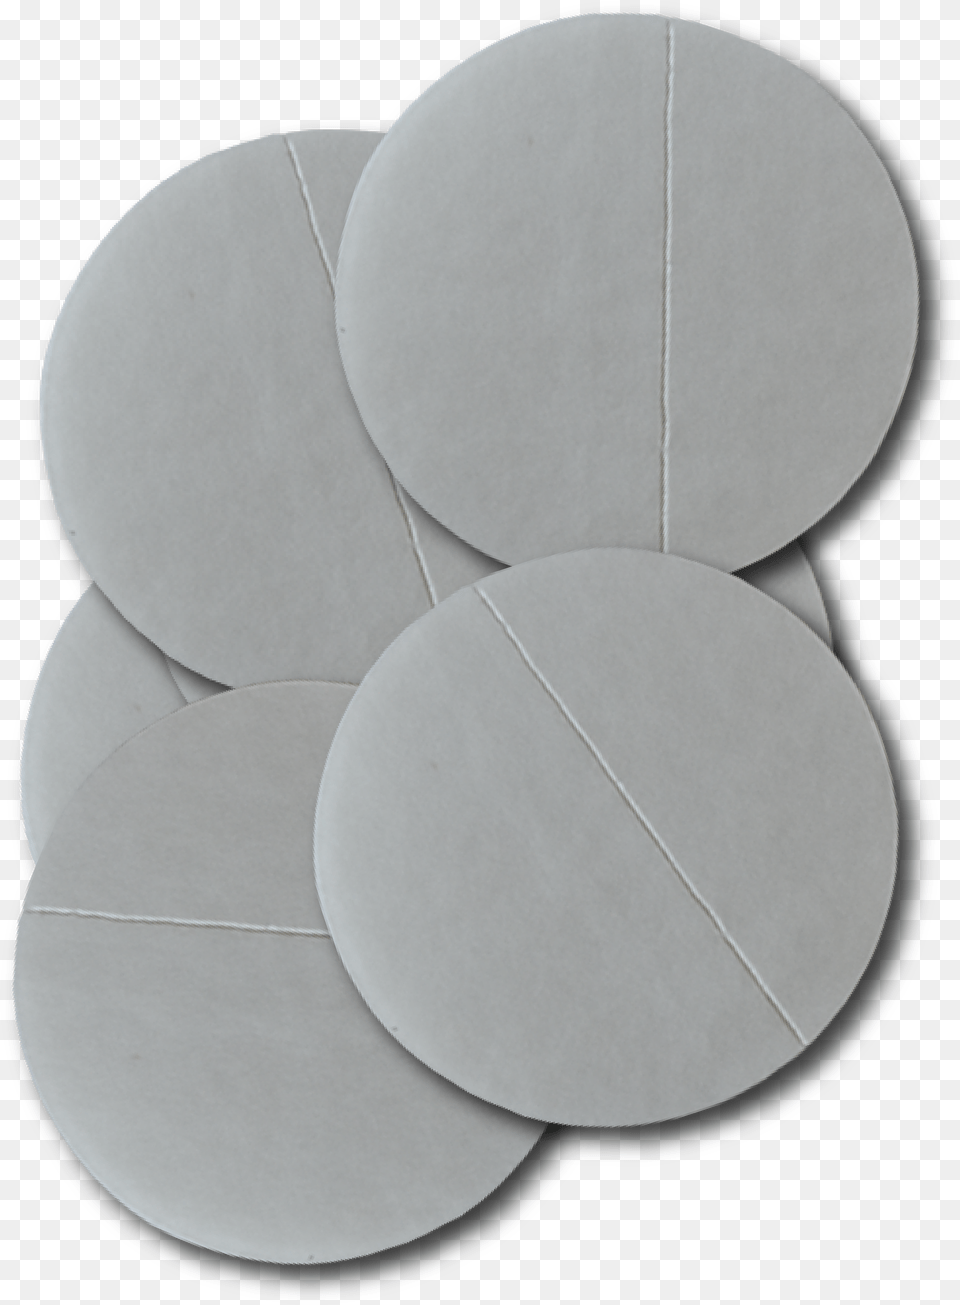 Sd 3011 Die Cut Circles Table, Slate, Plate Png Image